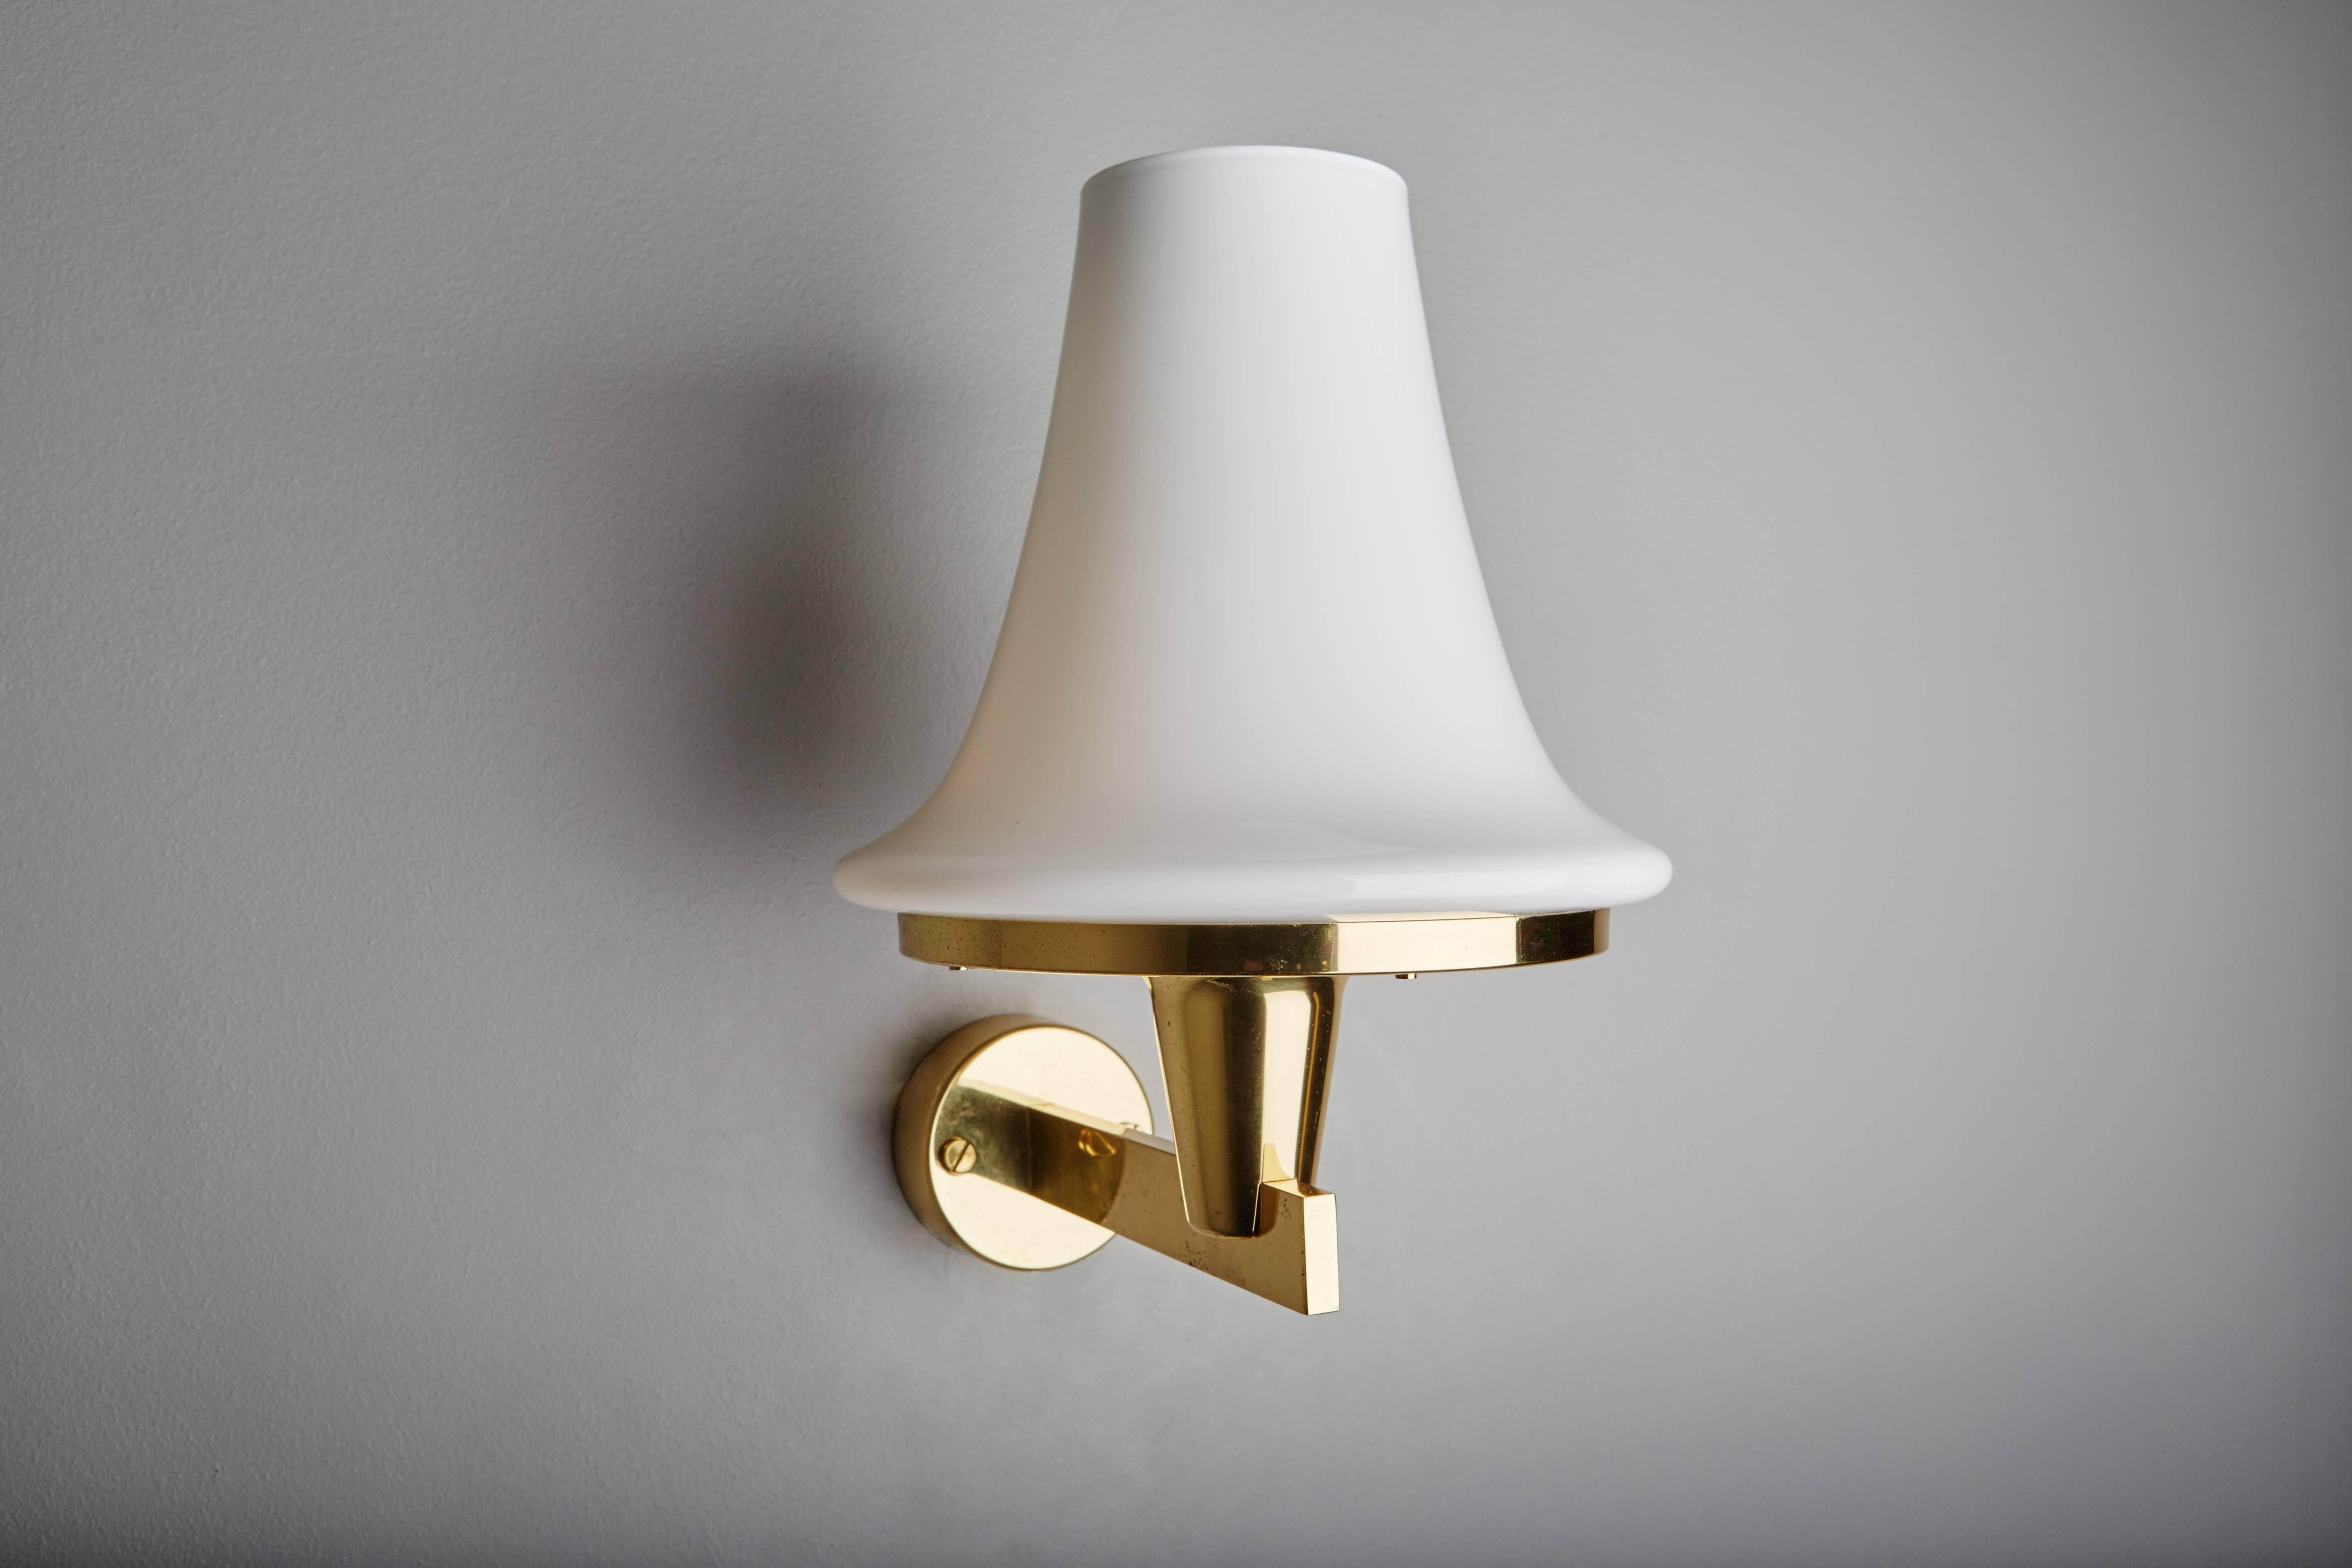 Pair of wall lamps by Hans-Agne Jakobsson.
Brass and opal glass. Swedish work from the 1970s.